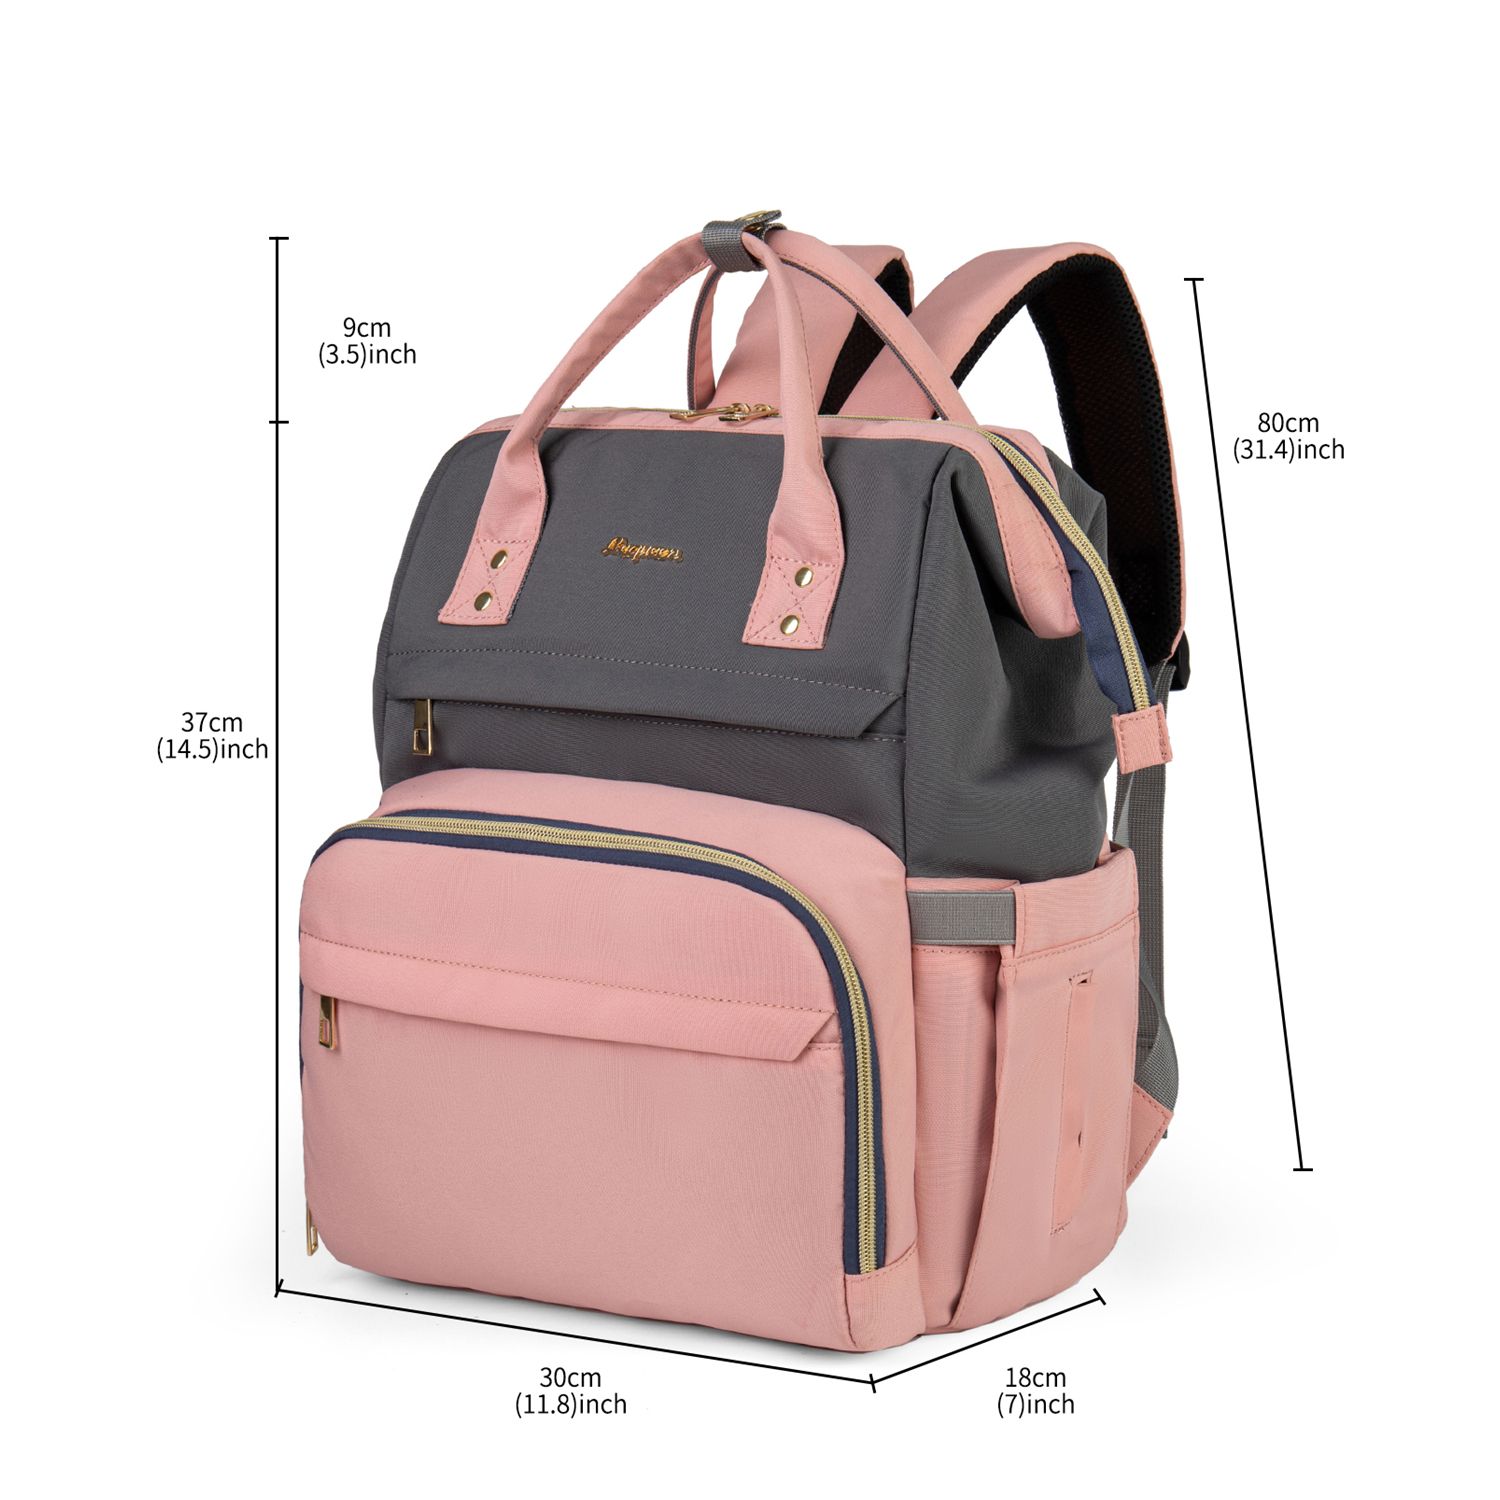 Diaper Bag Backpack Baby Bag Multifunction Waterproof Large Capacity Maternity Back Pack With Stroller Straps